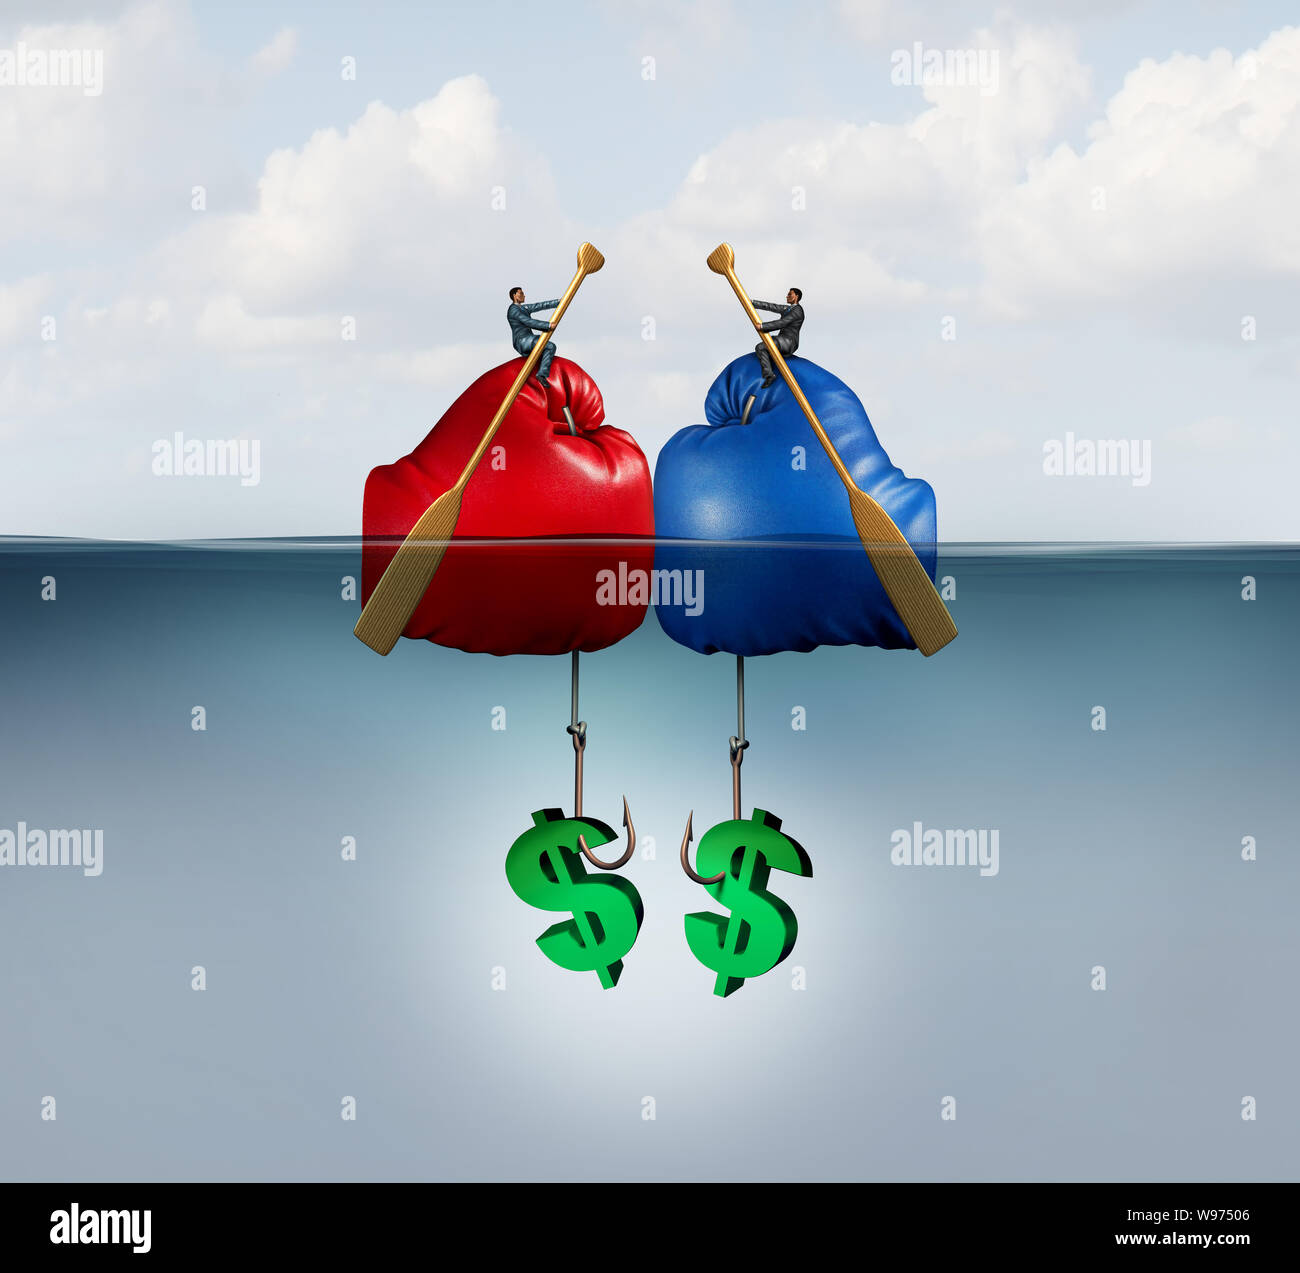 Fishing business concept as a corporate metaphor for financial competition or fish industry conflict with 3D illustration elements. Stock Photo